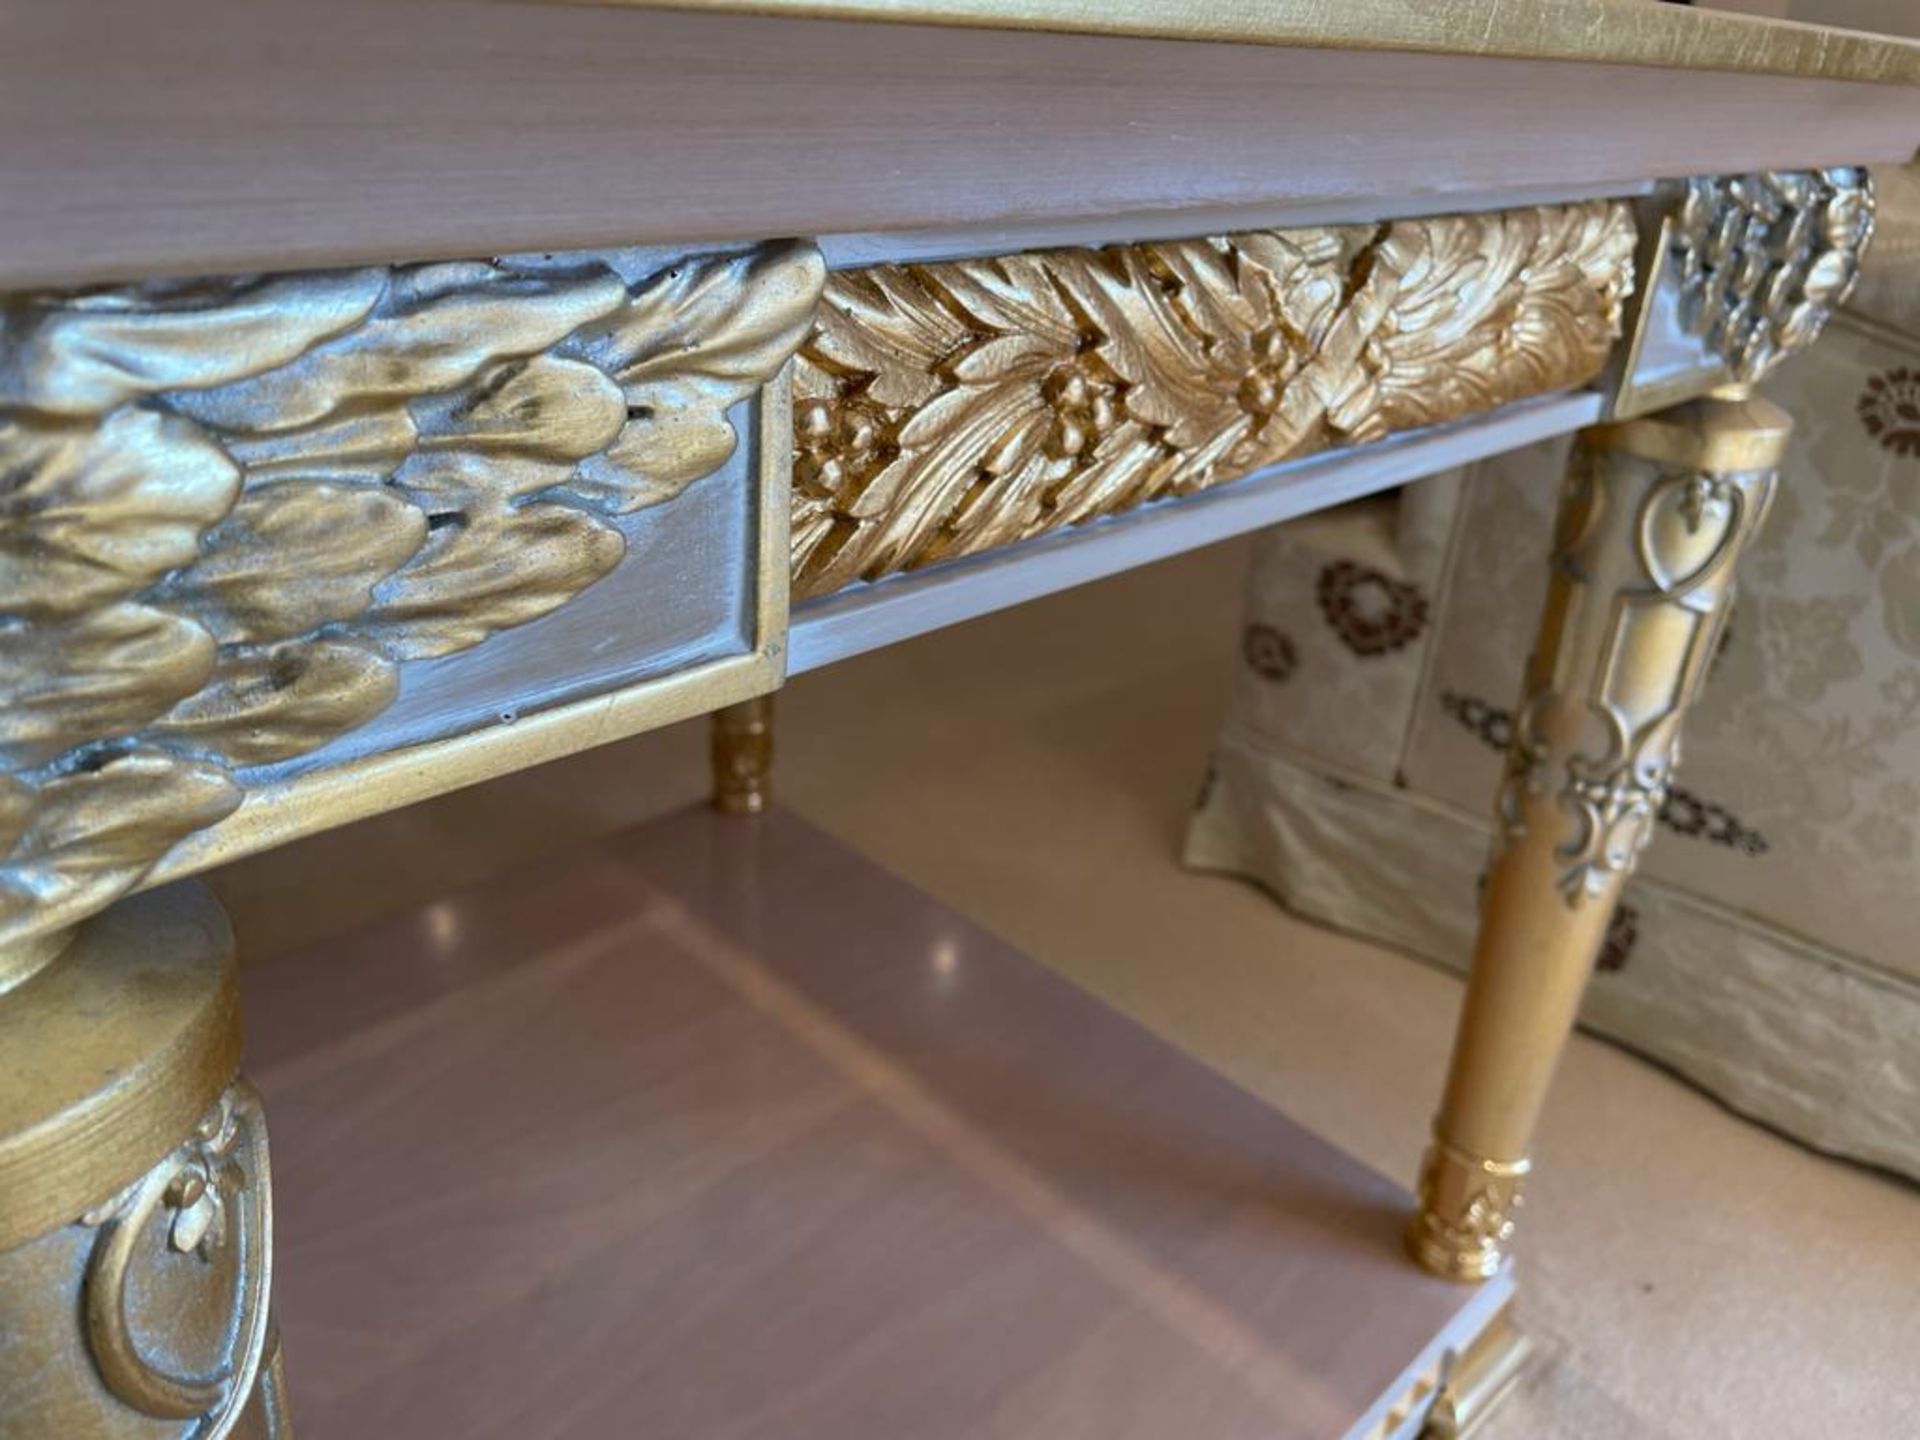 2 x Hand Carved Ornate Side Tables Complimented With Birchwood Veneer, Golden Pillar Legs, Carved - Image 2 of 13